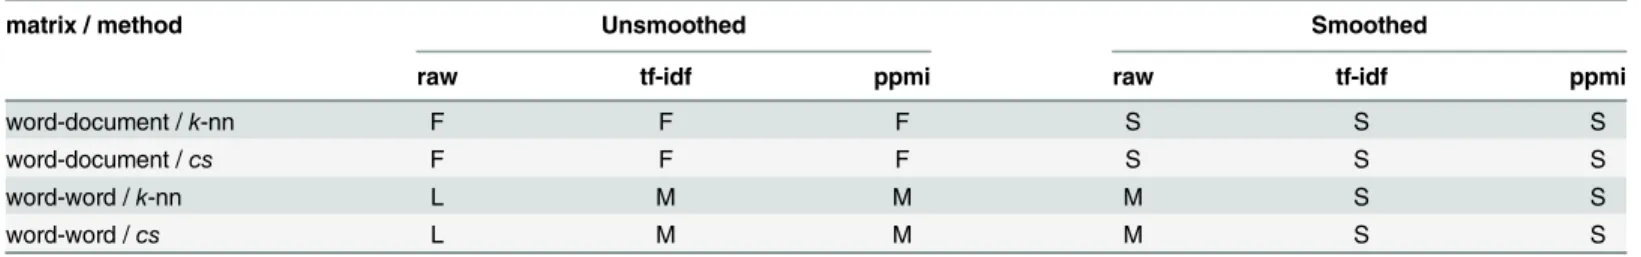 Table 4. Type of power-law behavior of in-degree distribution of DSM networks.